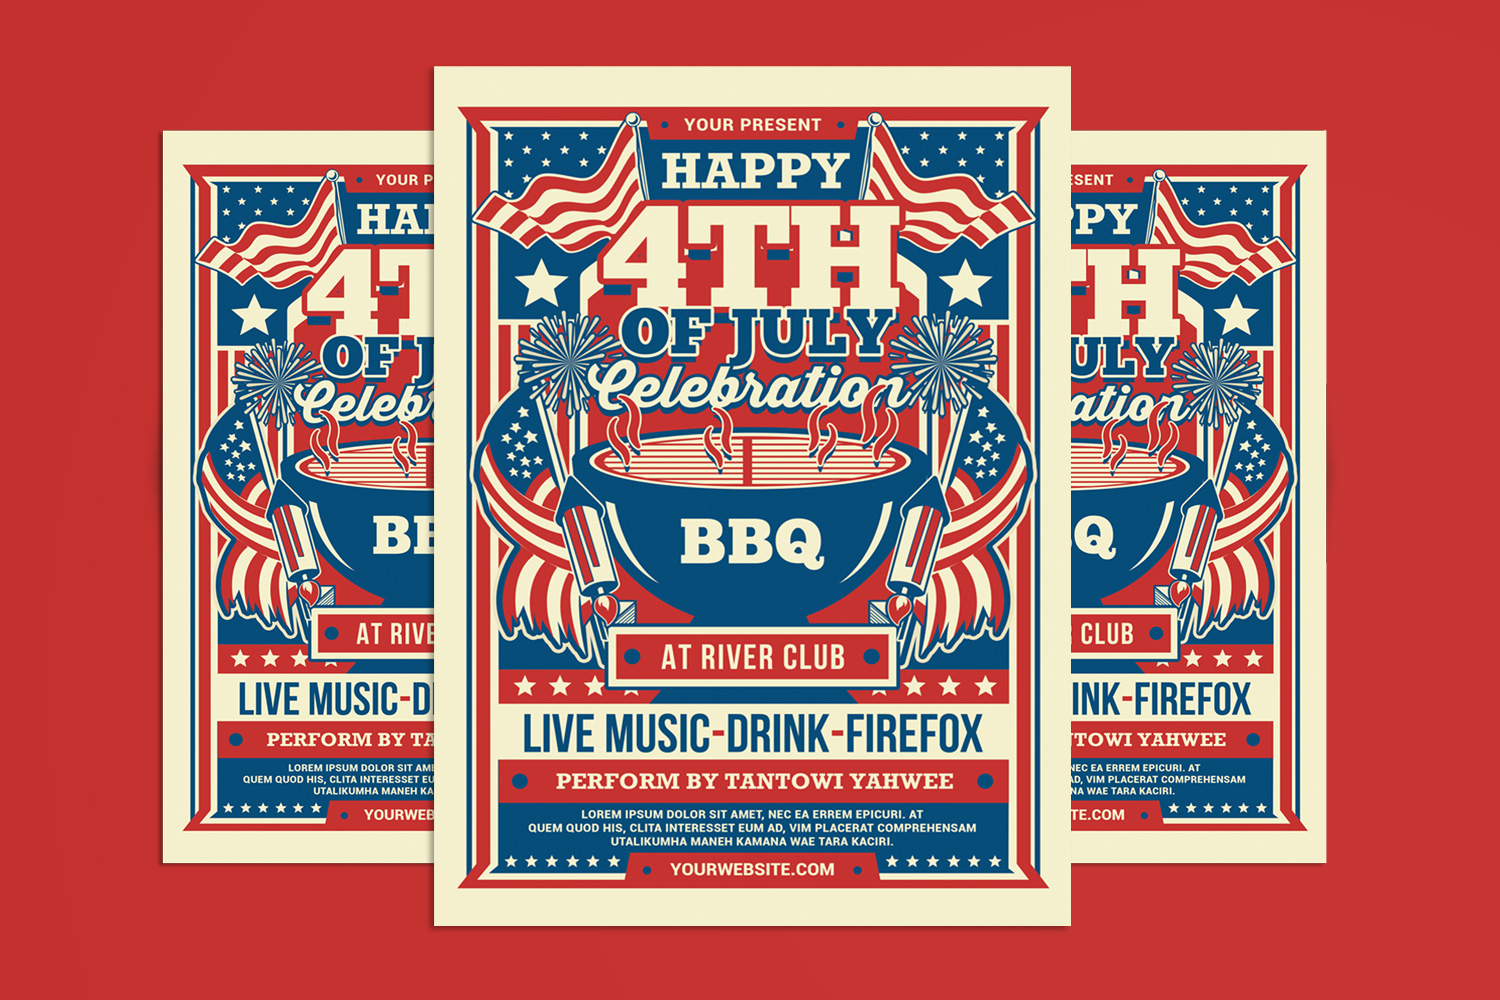 4th of July Celebration BBQ Party flyer Tempate